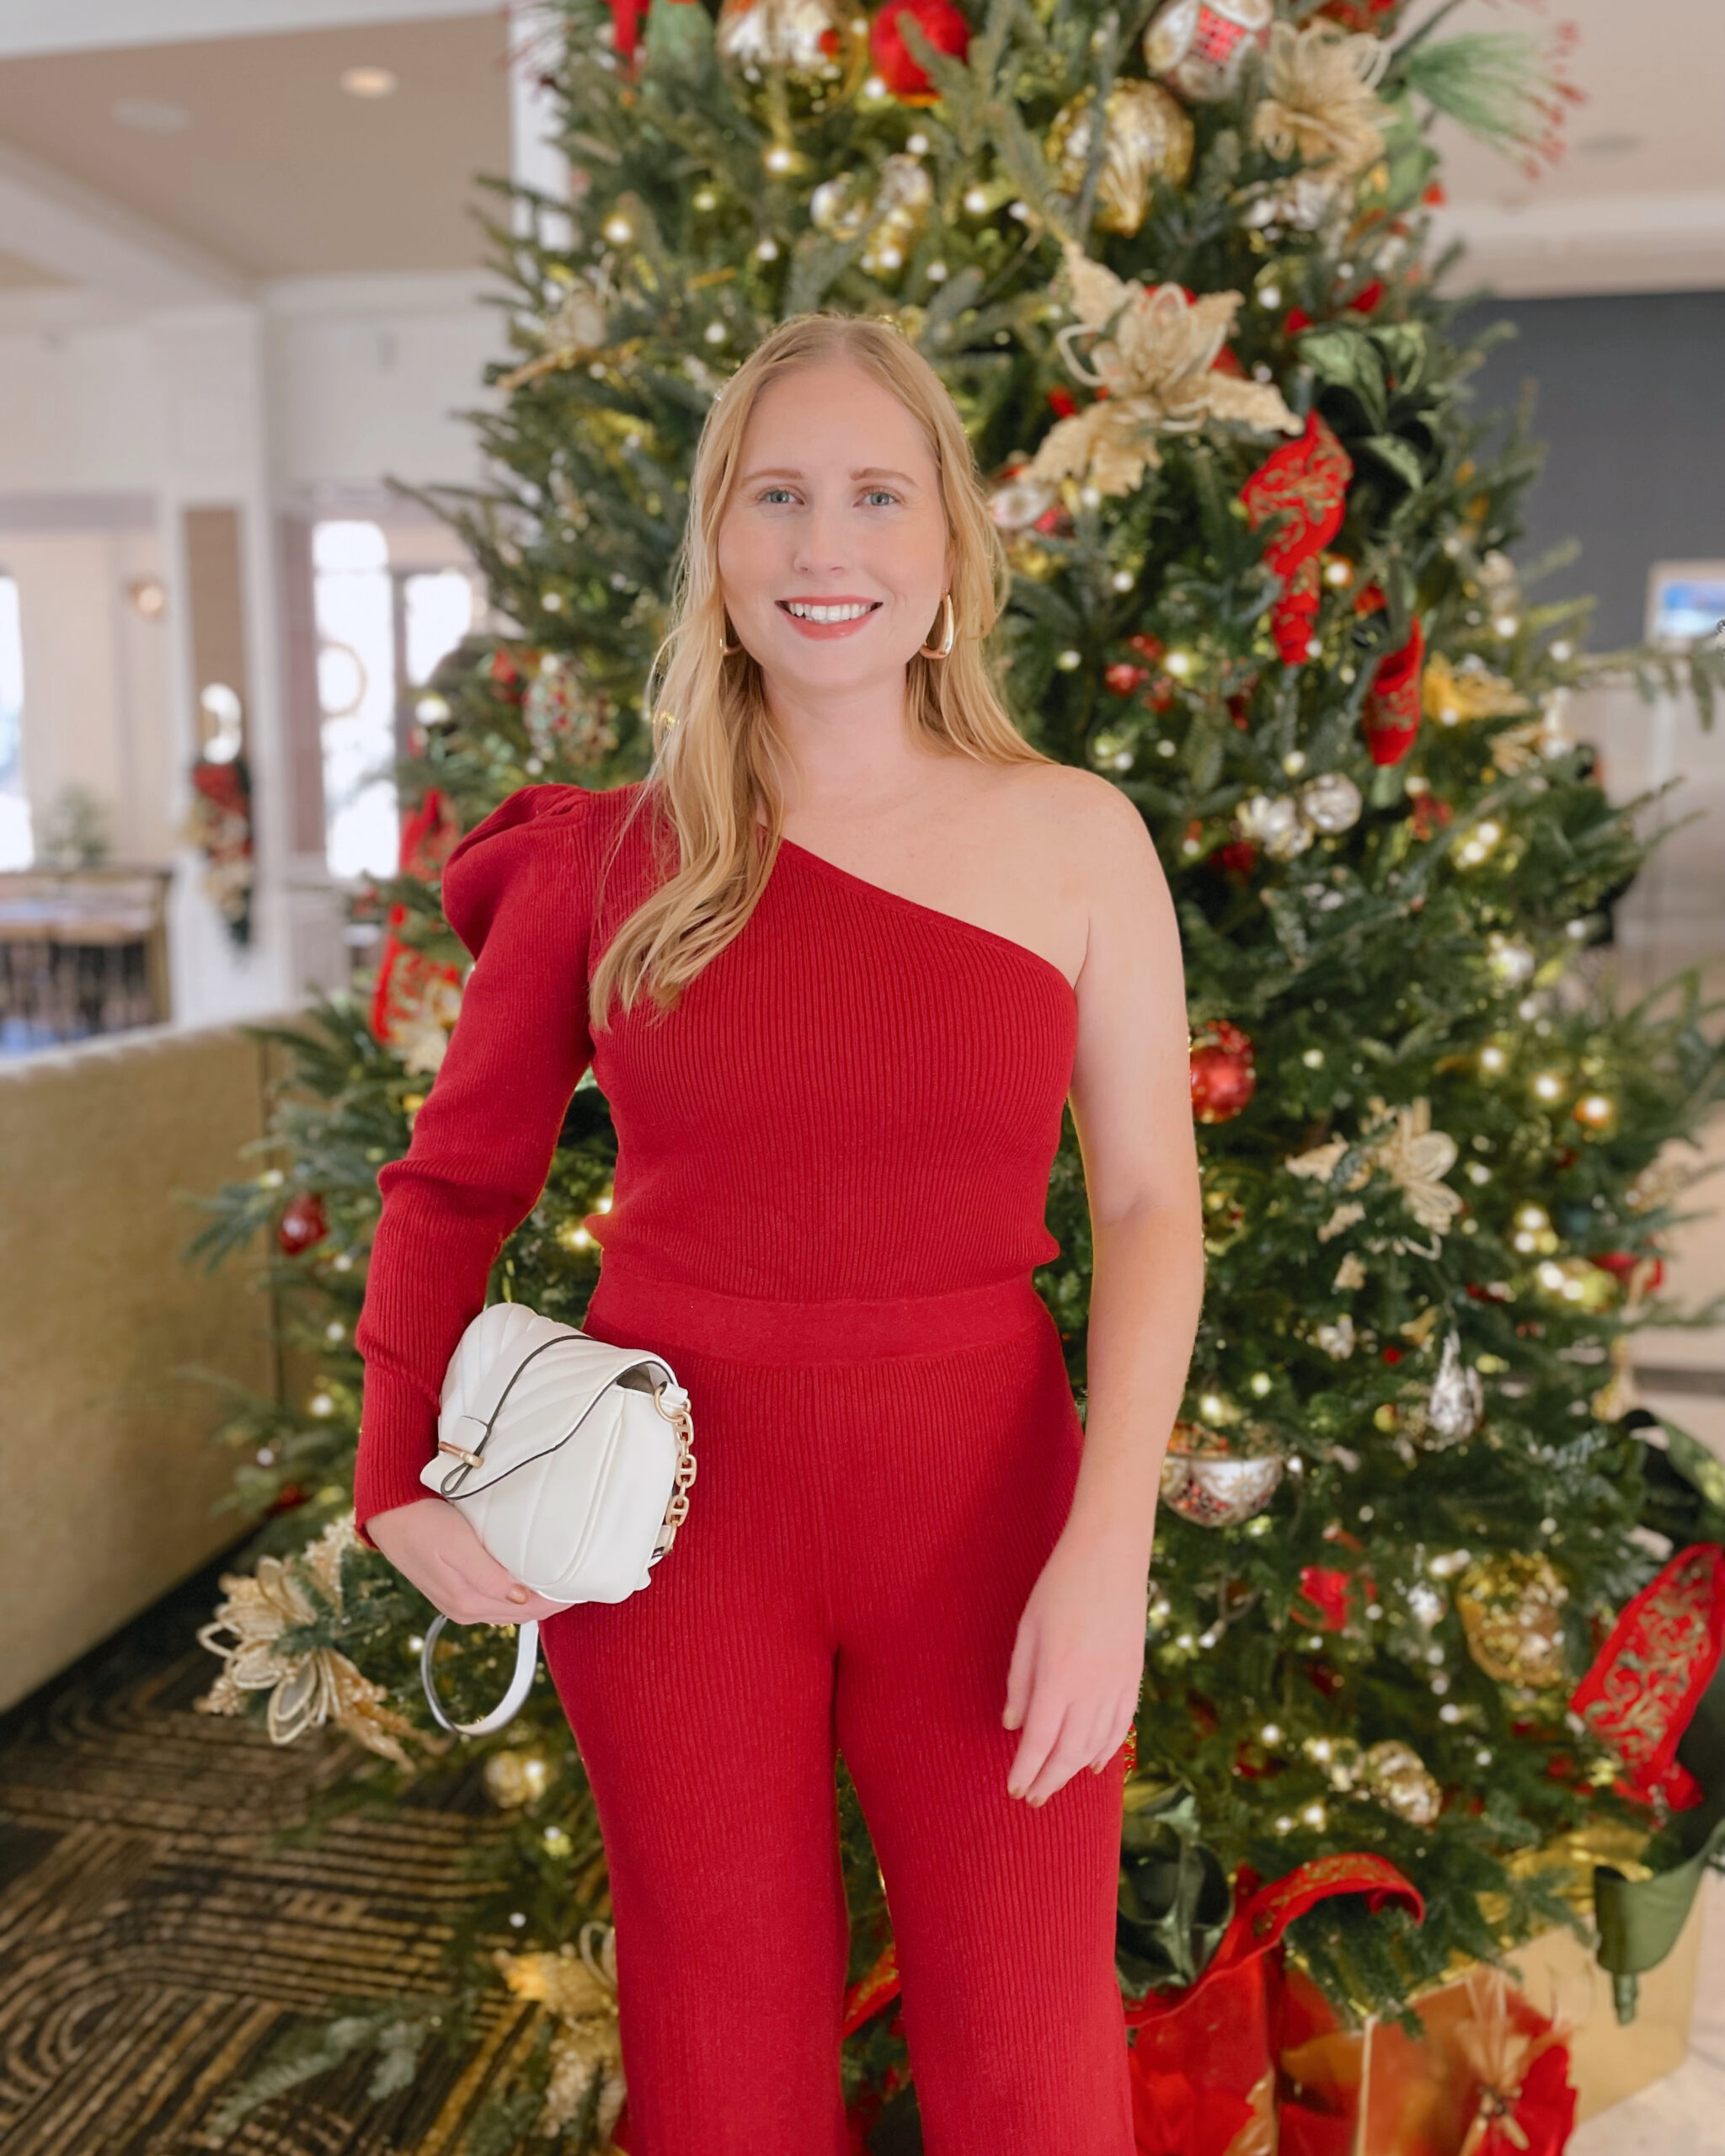 Walmart Holiday Outfits Under $50 - Affordable by Amanda